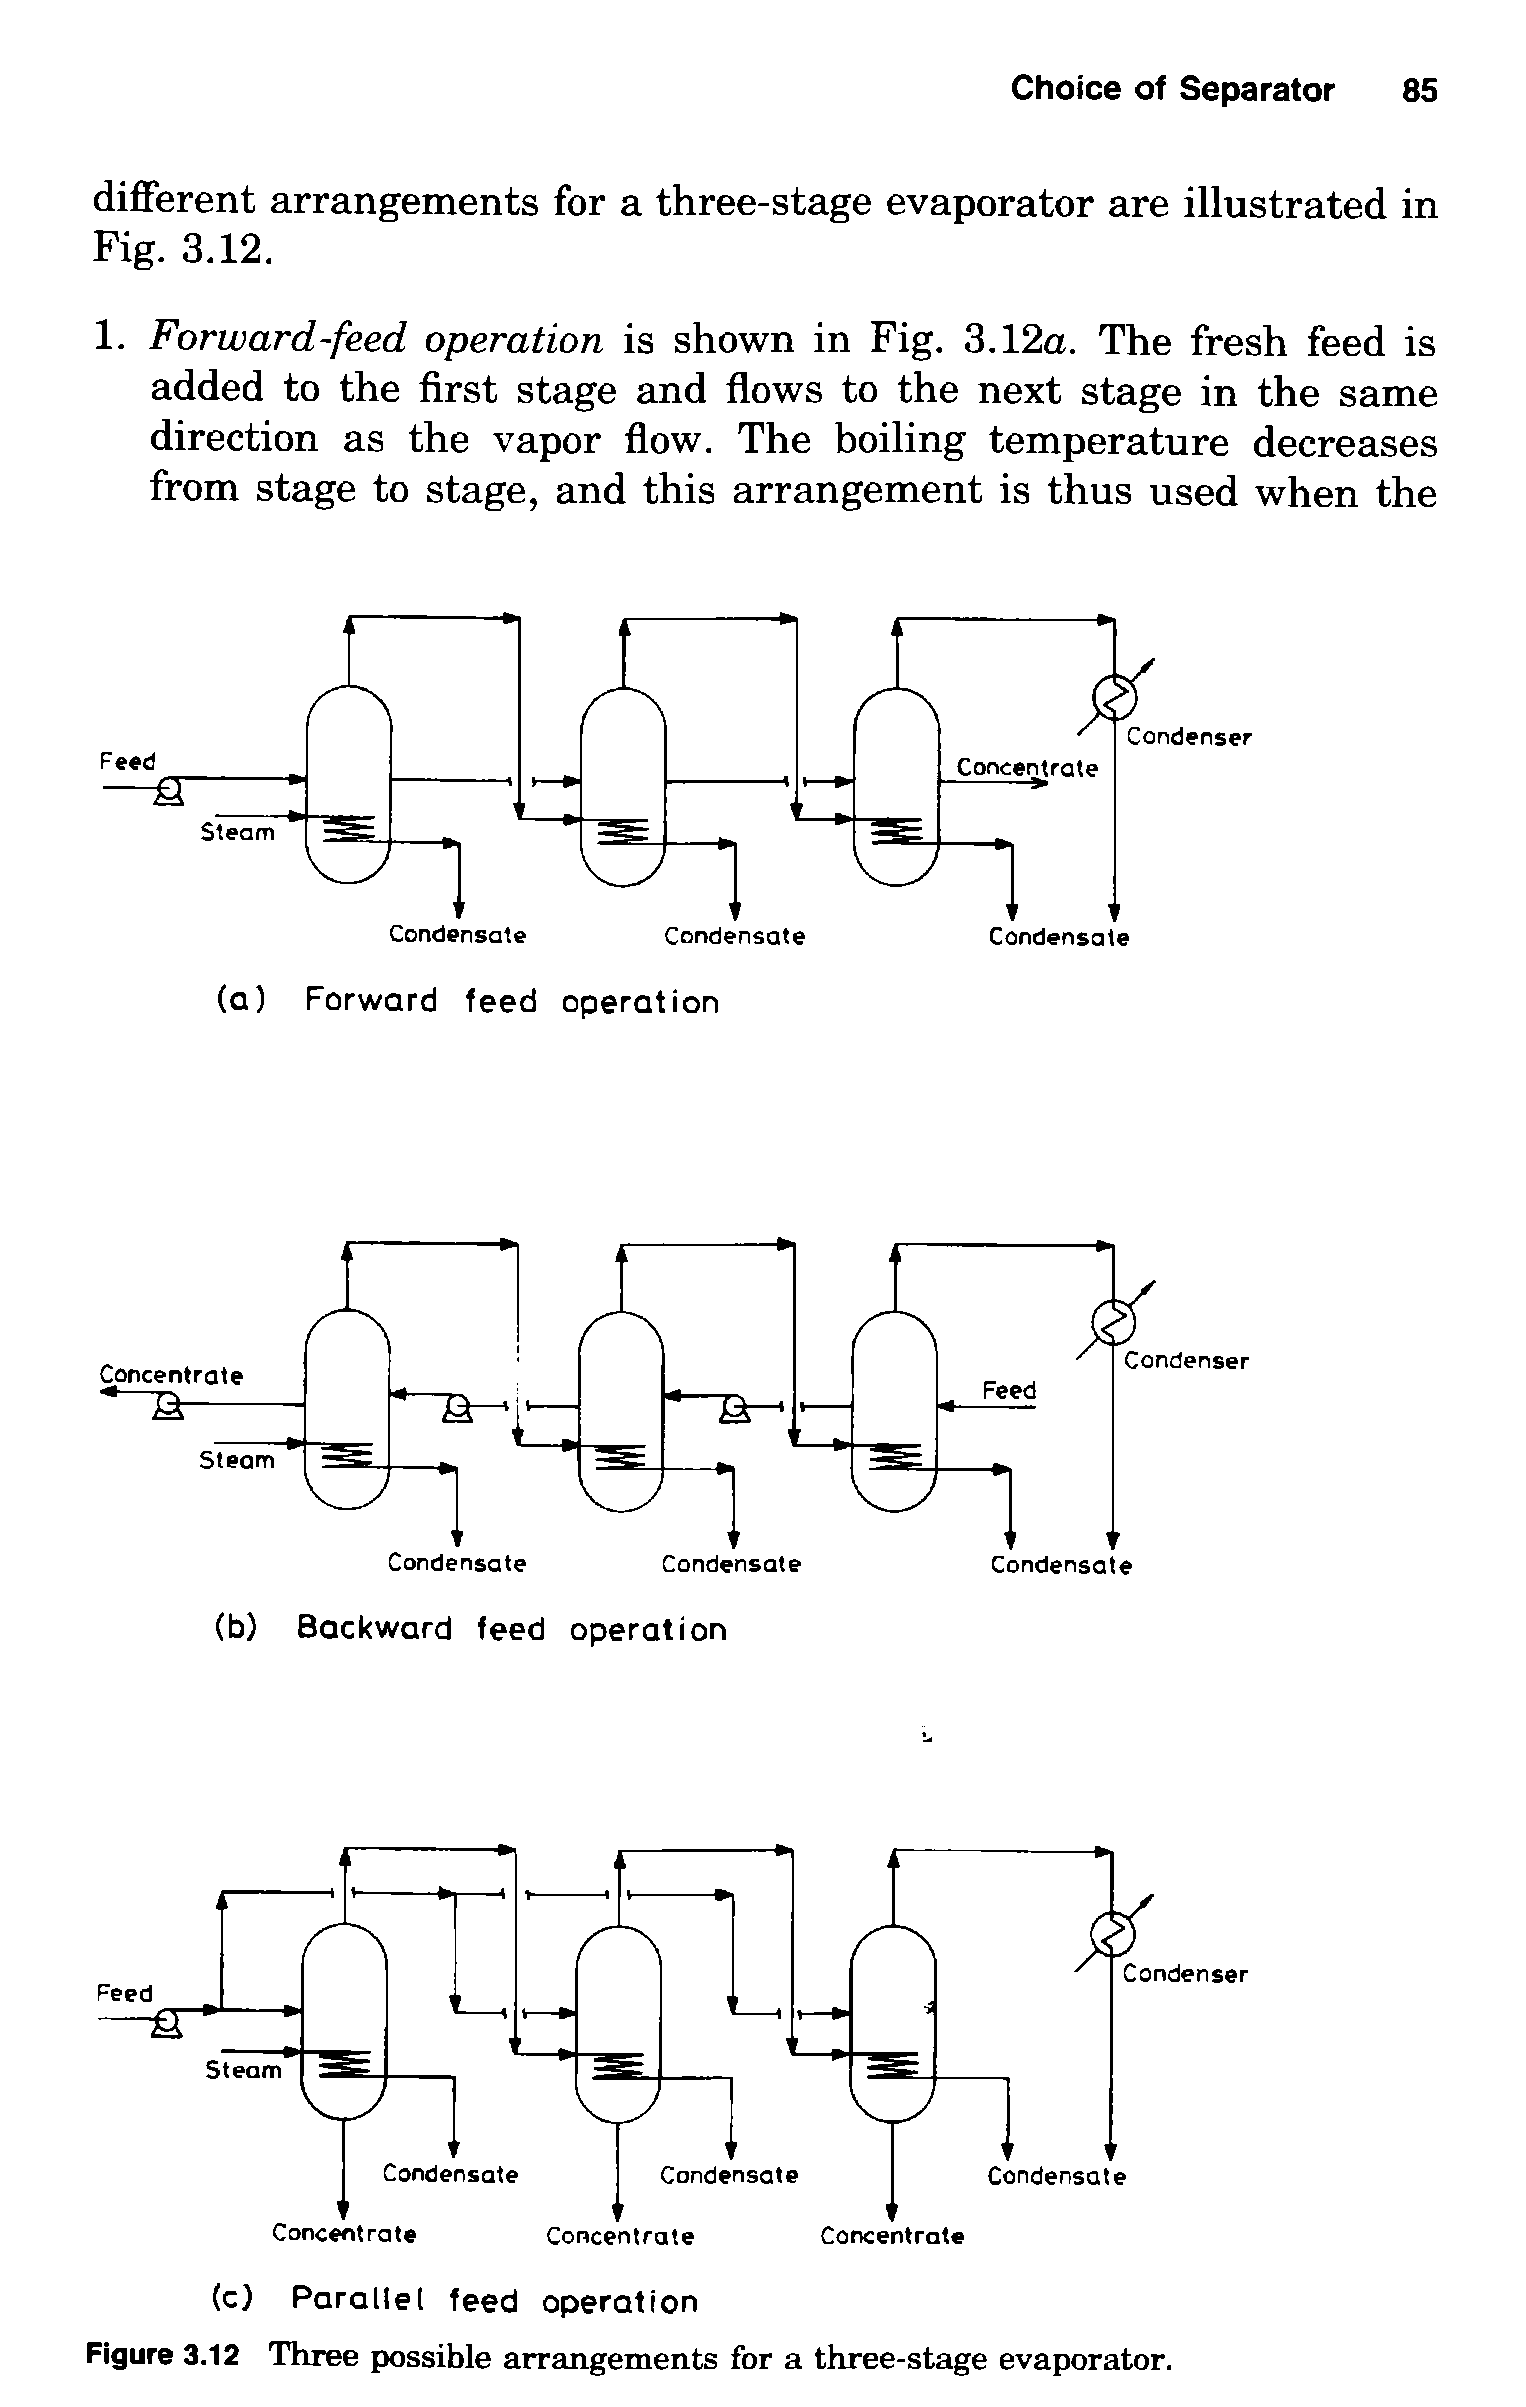 Figure 3.12 Three possible arrangements for a three-stage evaporator.